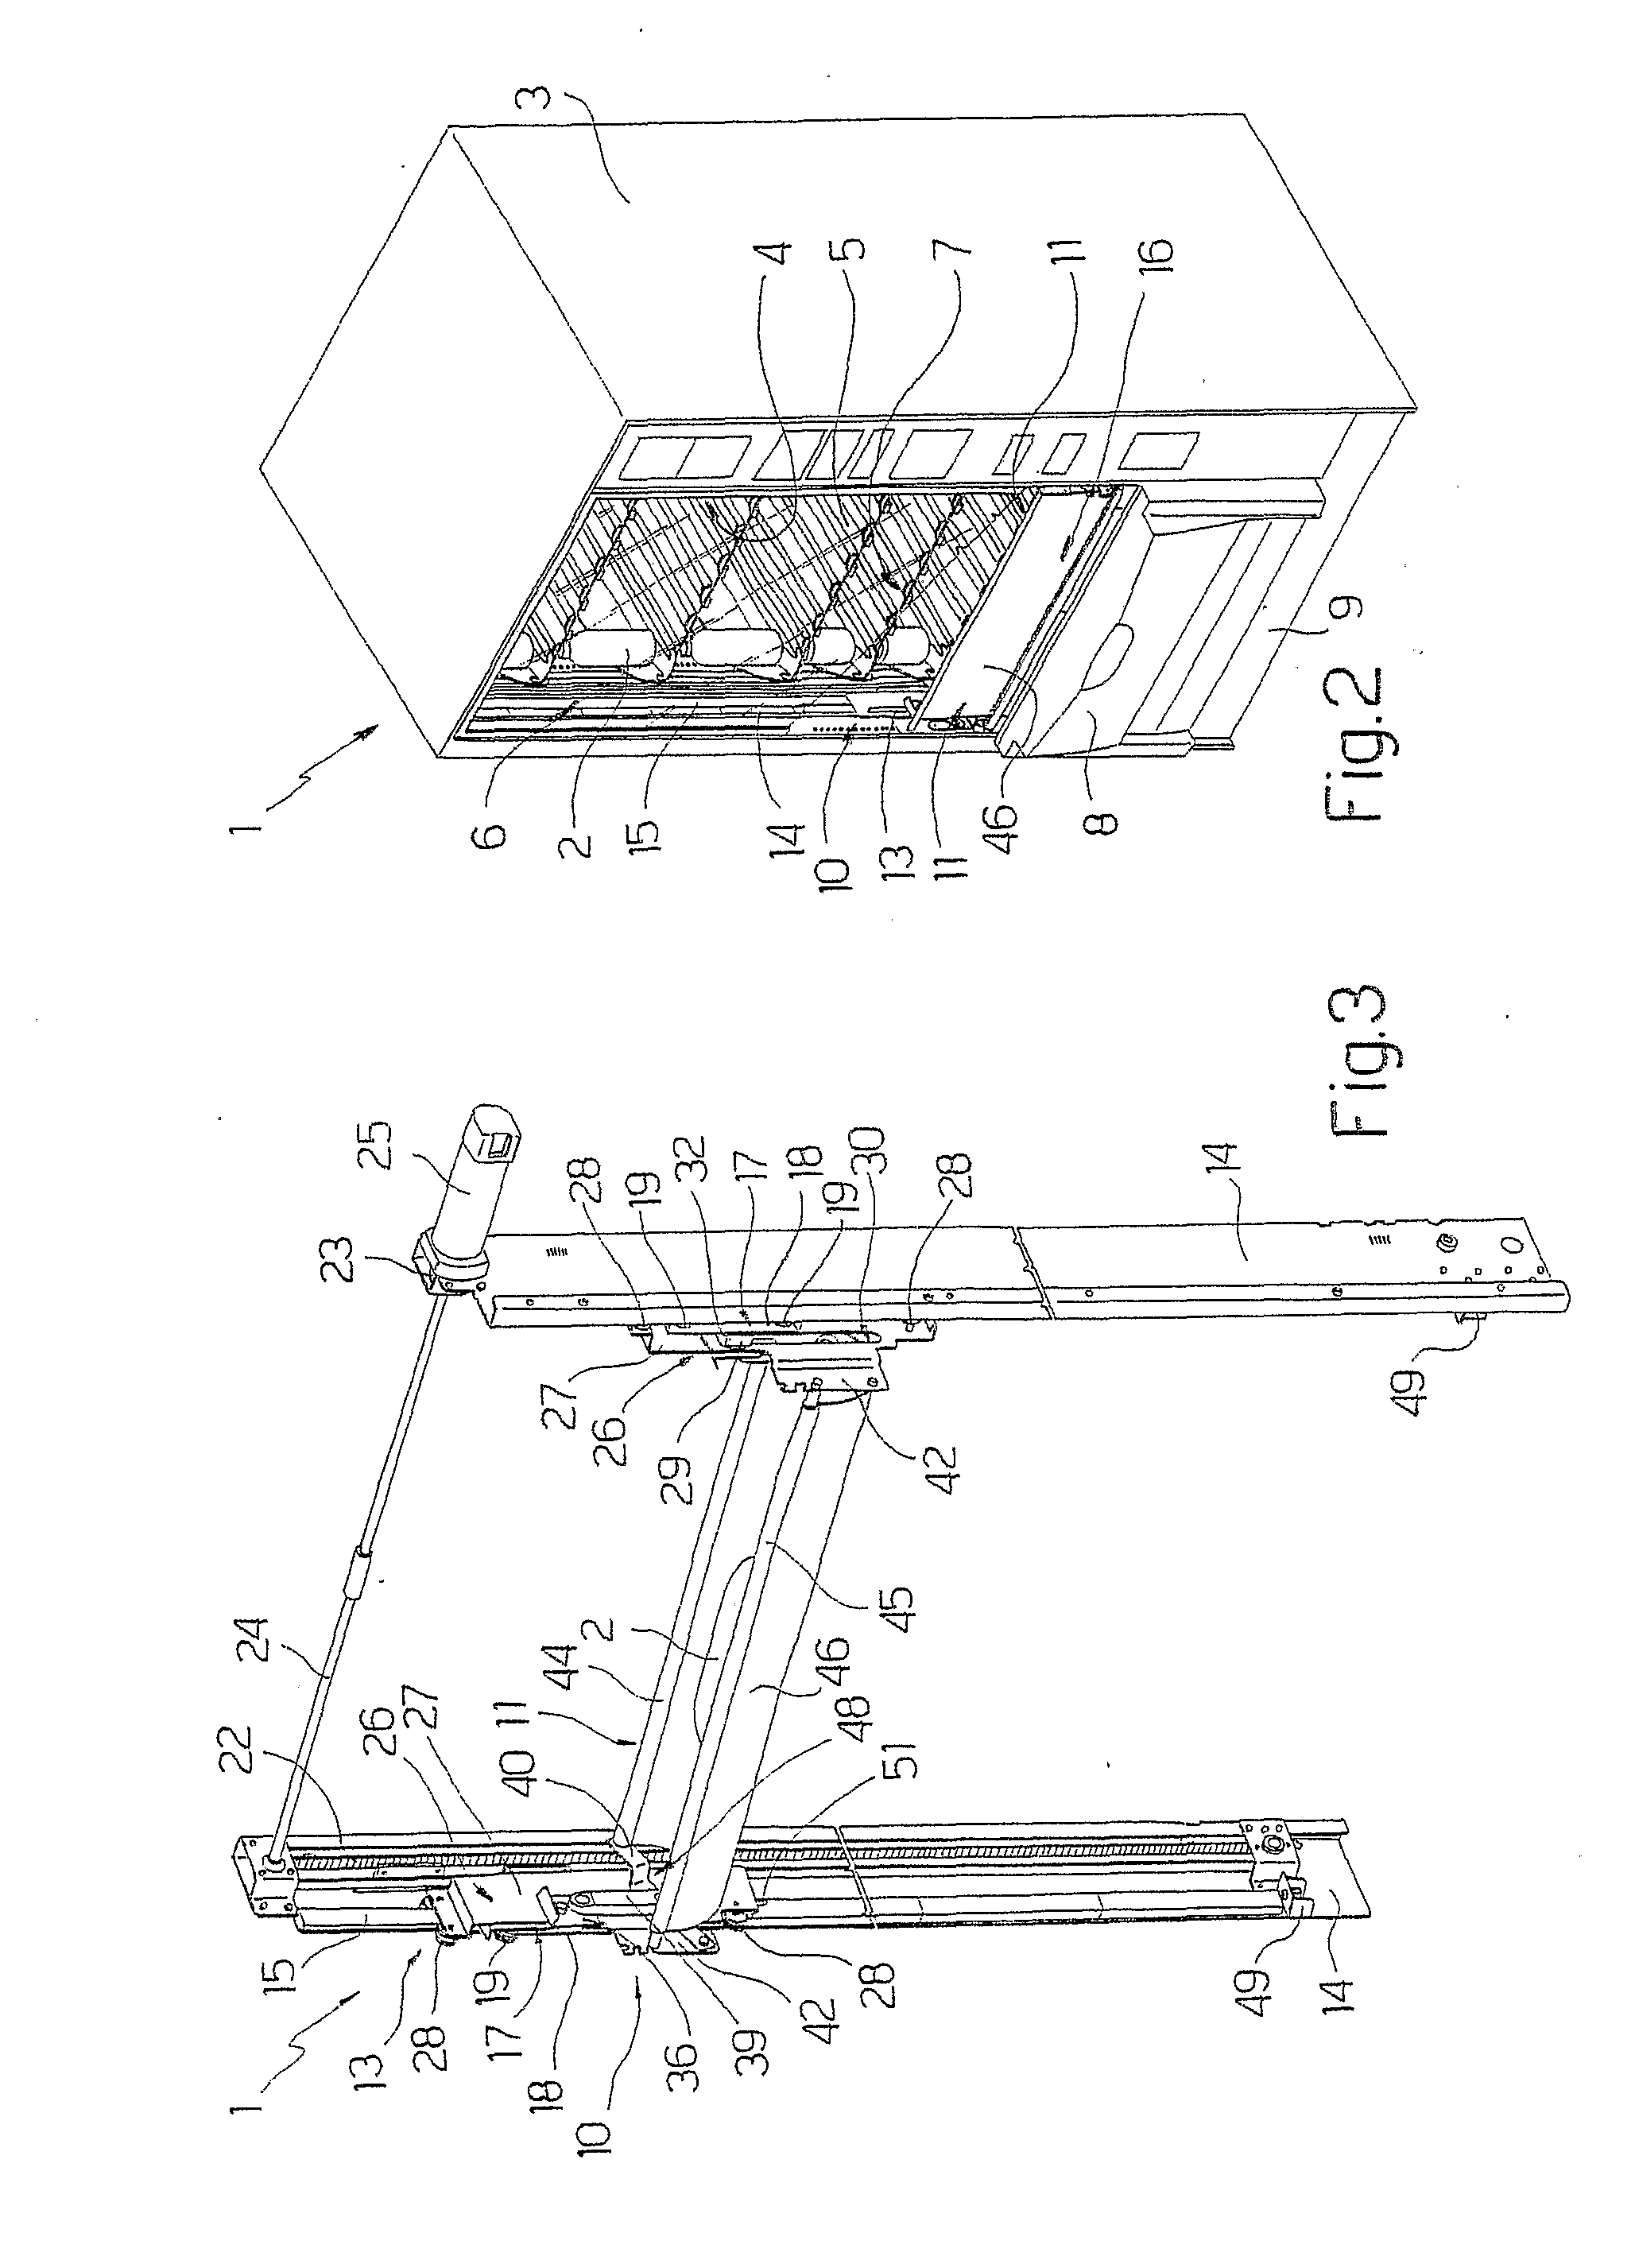 Method and device for transferring products in a vending machine